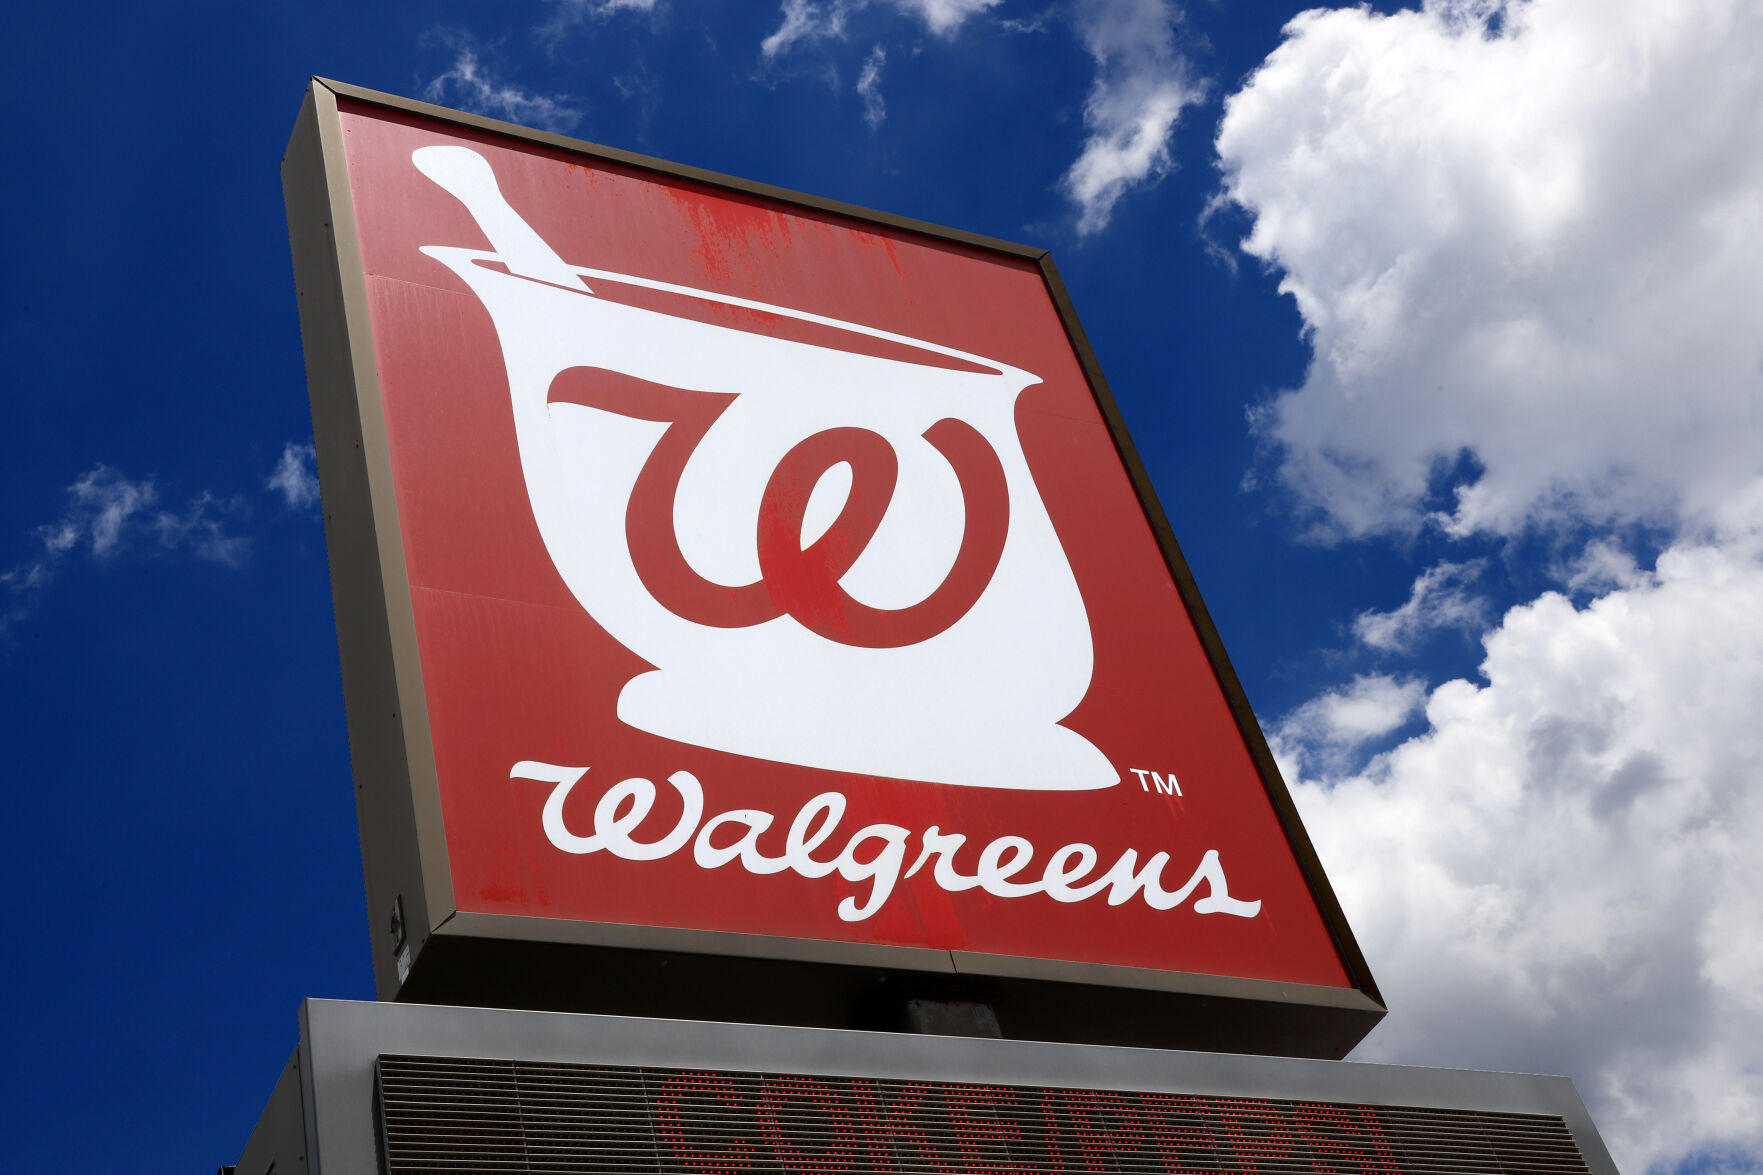 <p>FILE - This June 25, 2019, file photo shows a sign outside a Walgreens Pharmacy in Pittsburgh. Walgreens slashed its earnings forecast for the year, Tuesday, June 27, 2023, and raised a cost-cutting goal after missing analyst profit expectations in its fiscal third quarter. (AP Photo/Gene J. Puskar, File)</p>   PHOTO CREDIT: Gene J. Puskar